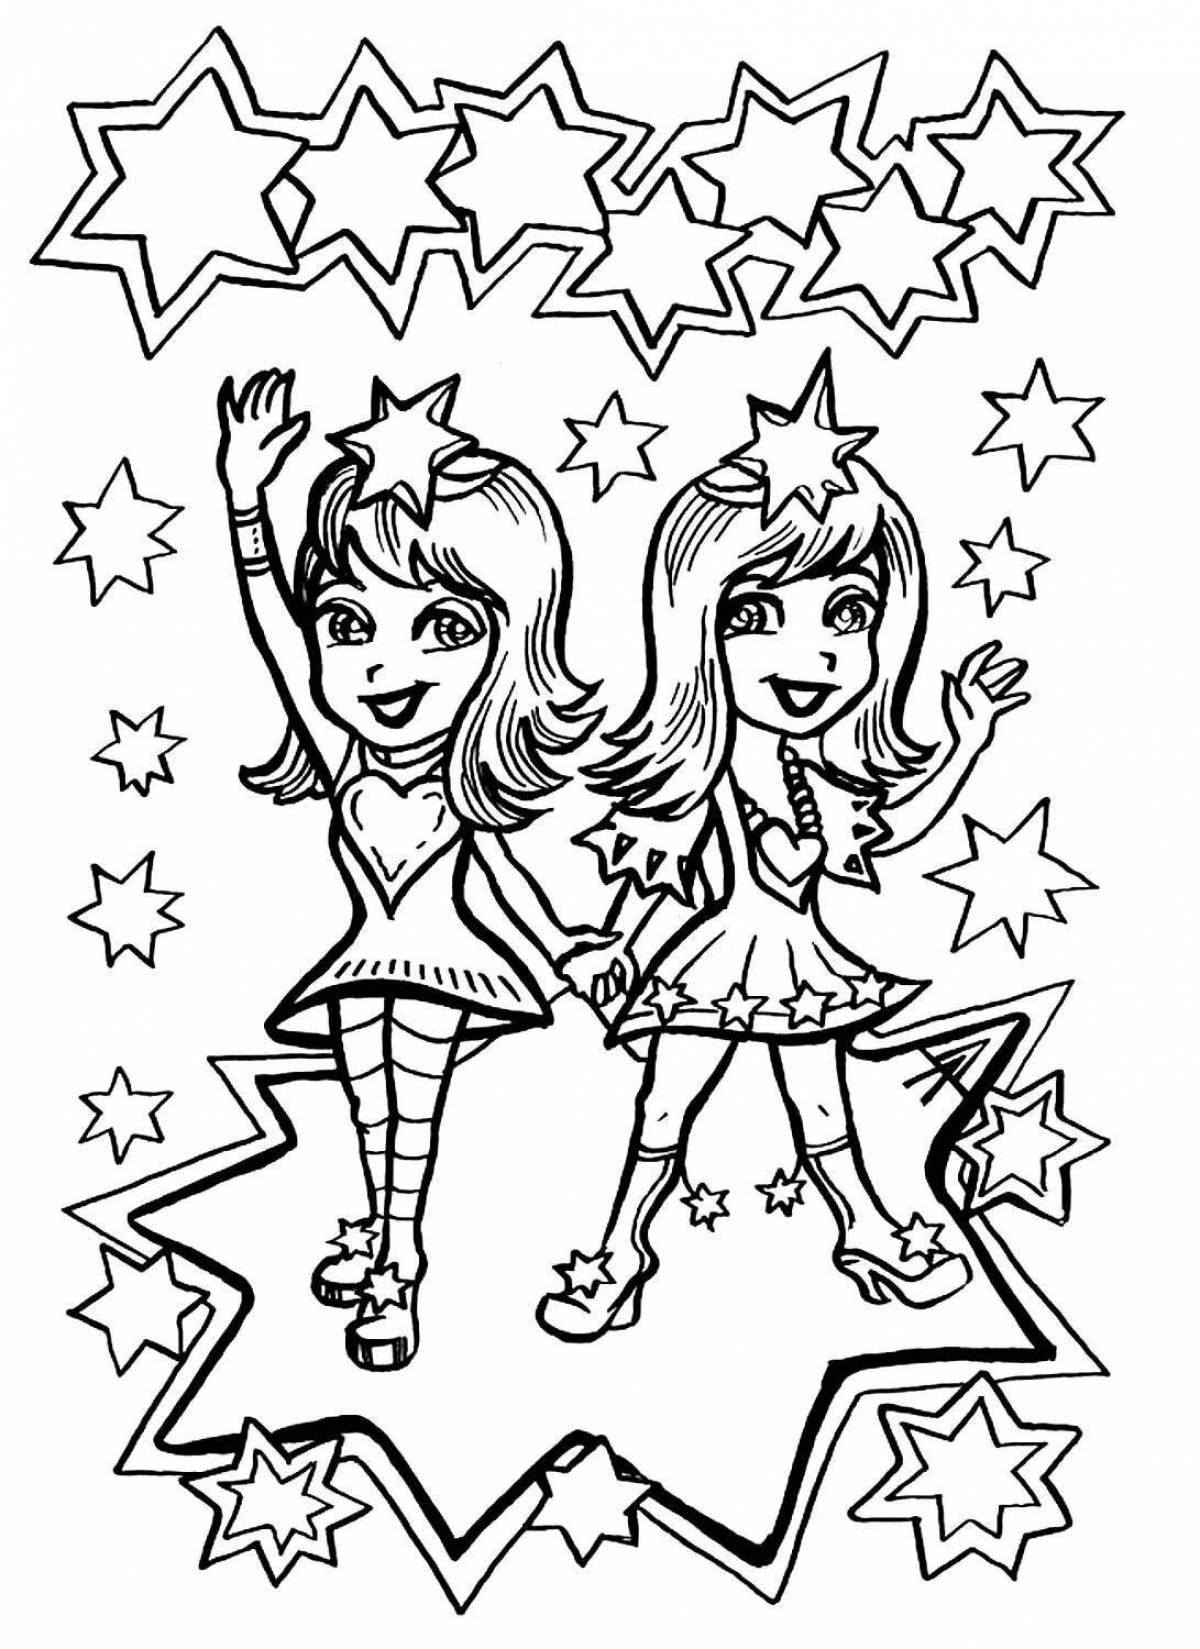 Attractive zodiac signs coloring pages for kids